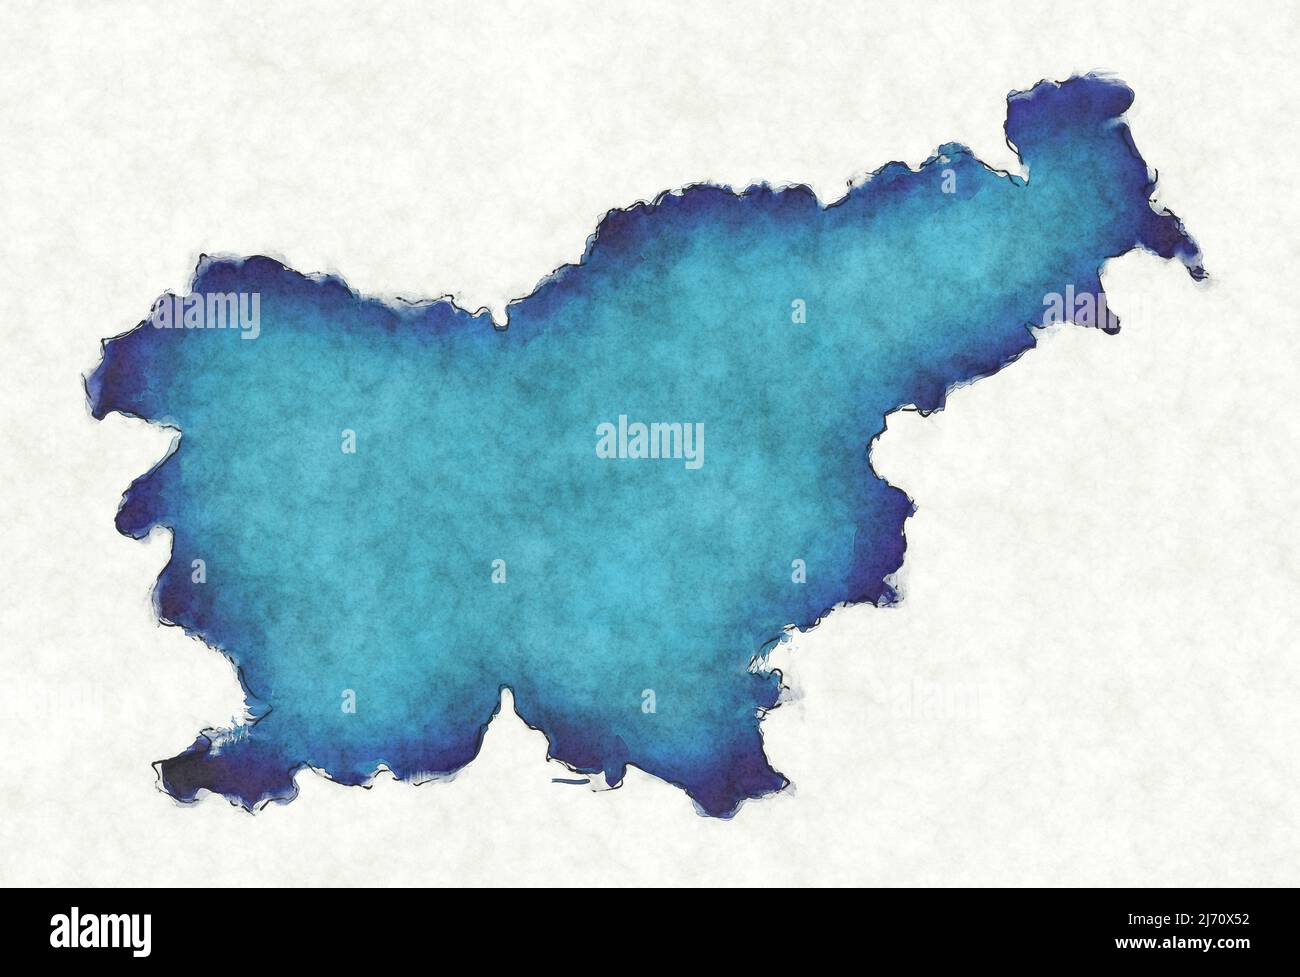 Slovenia map with drawn lines and blue watercolor illustration Stock Photo